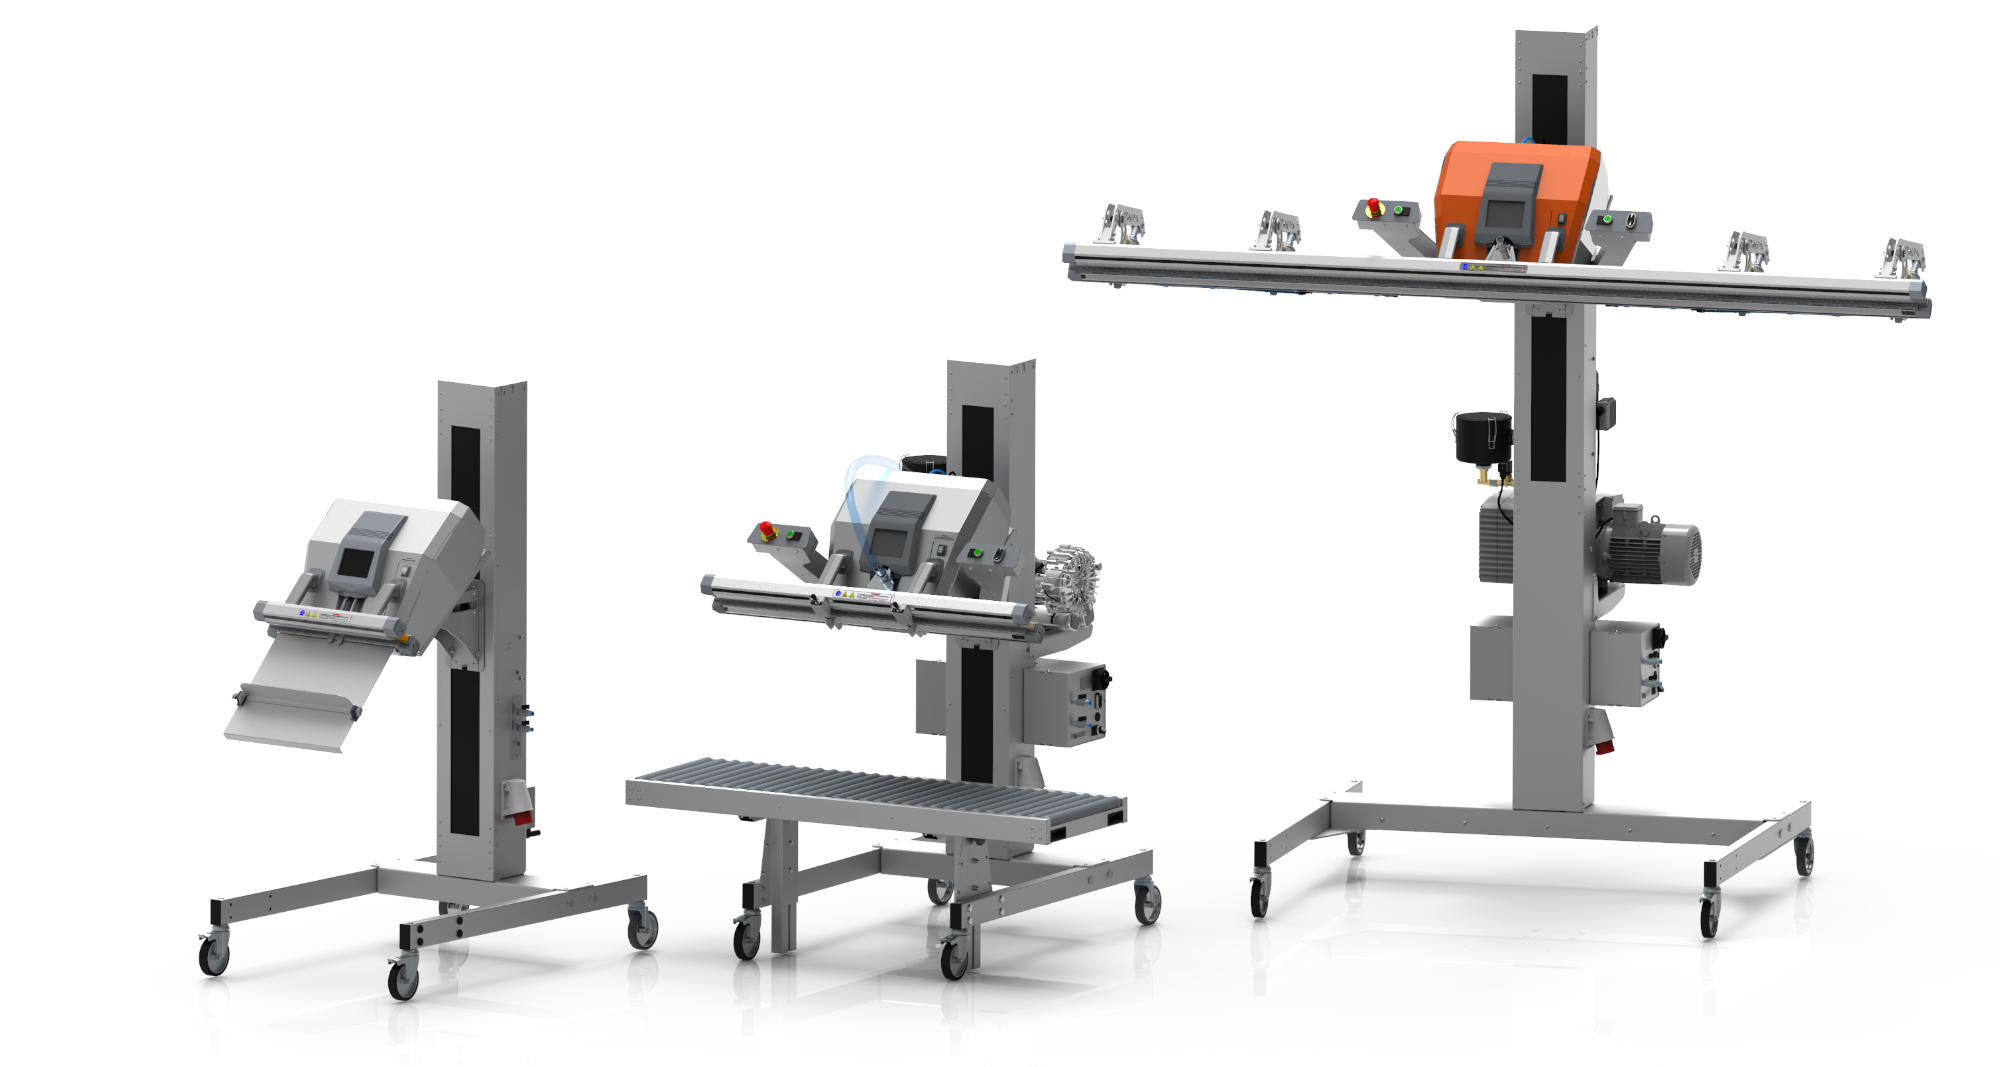 MSS modular stand system family